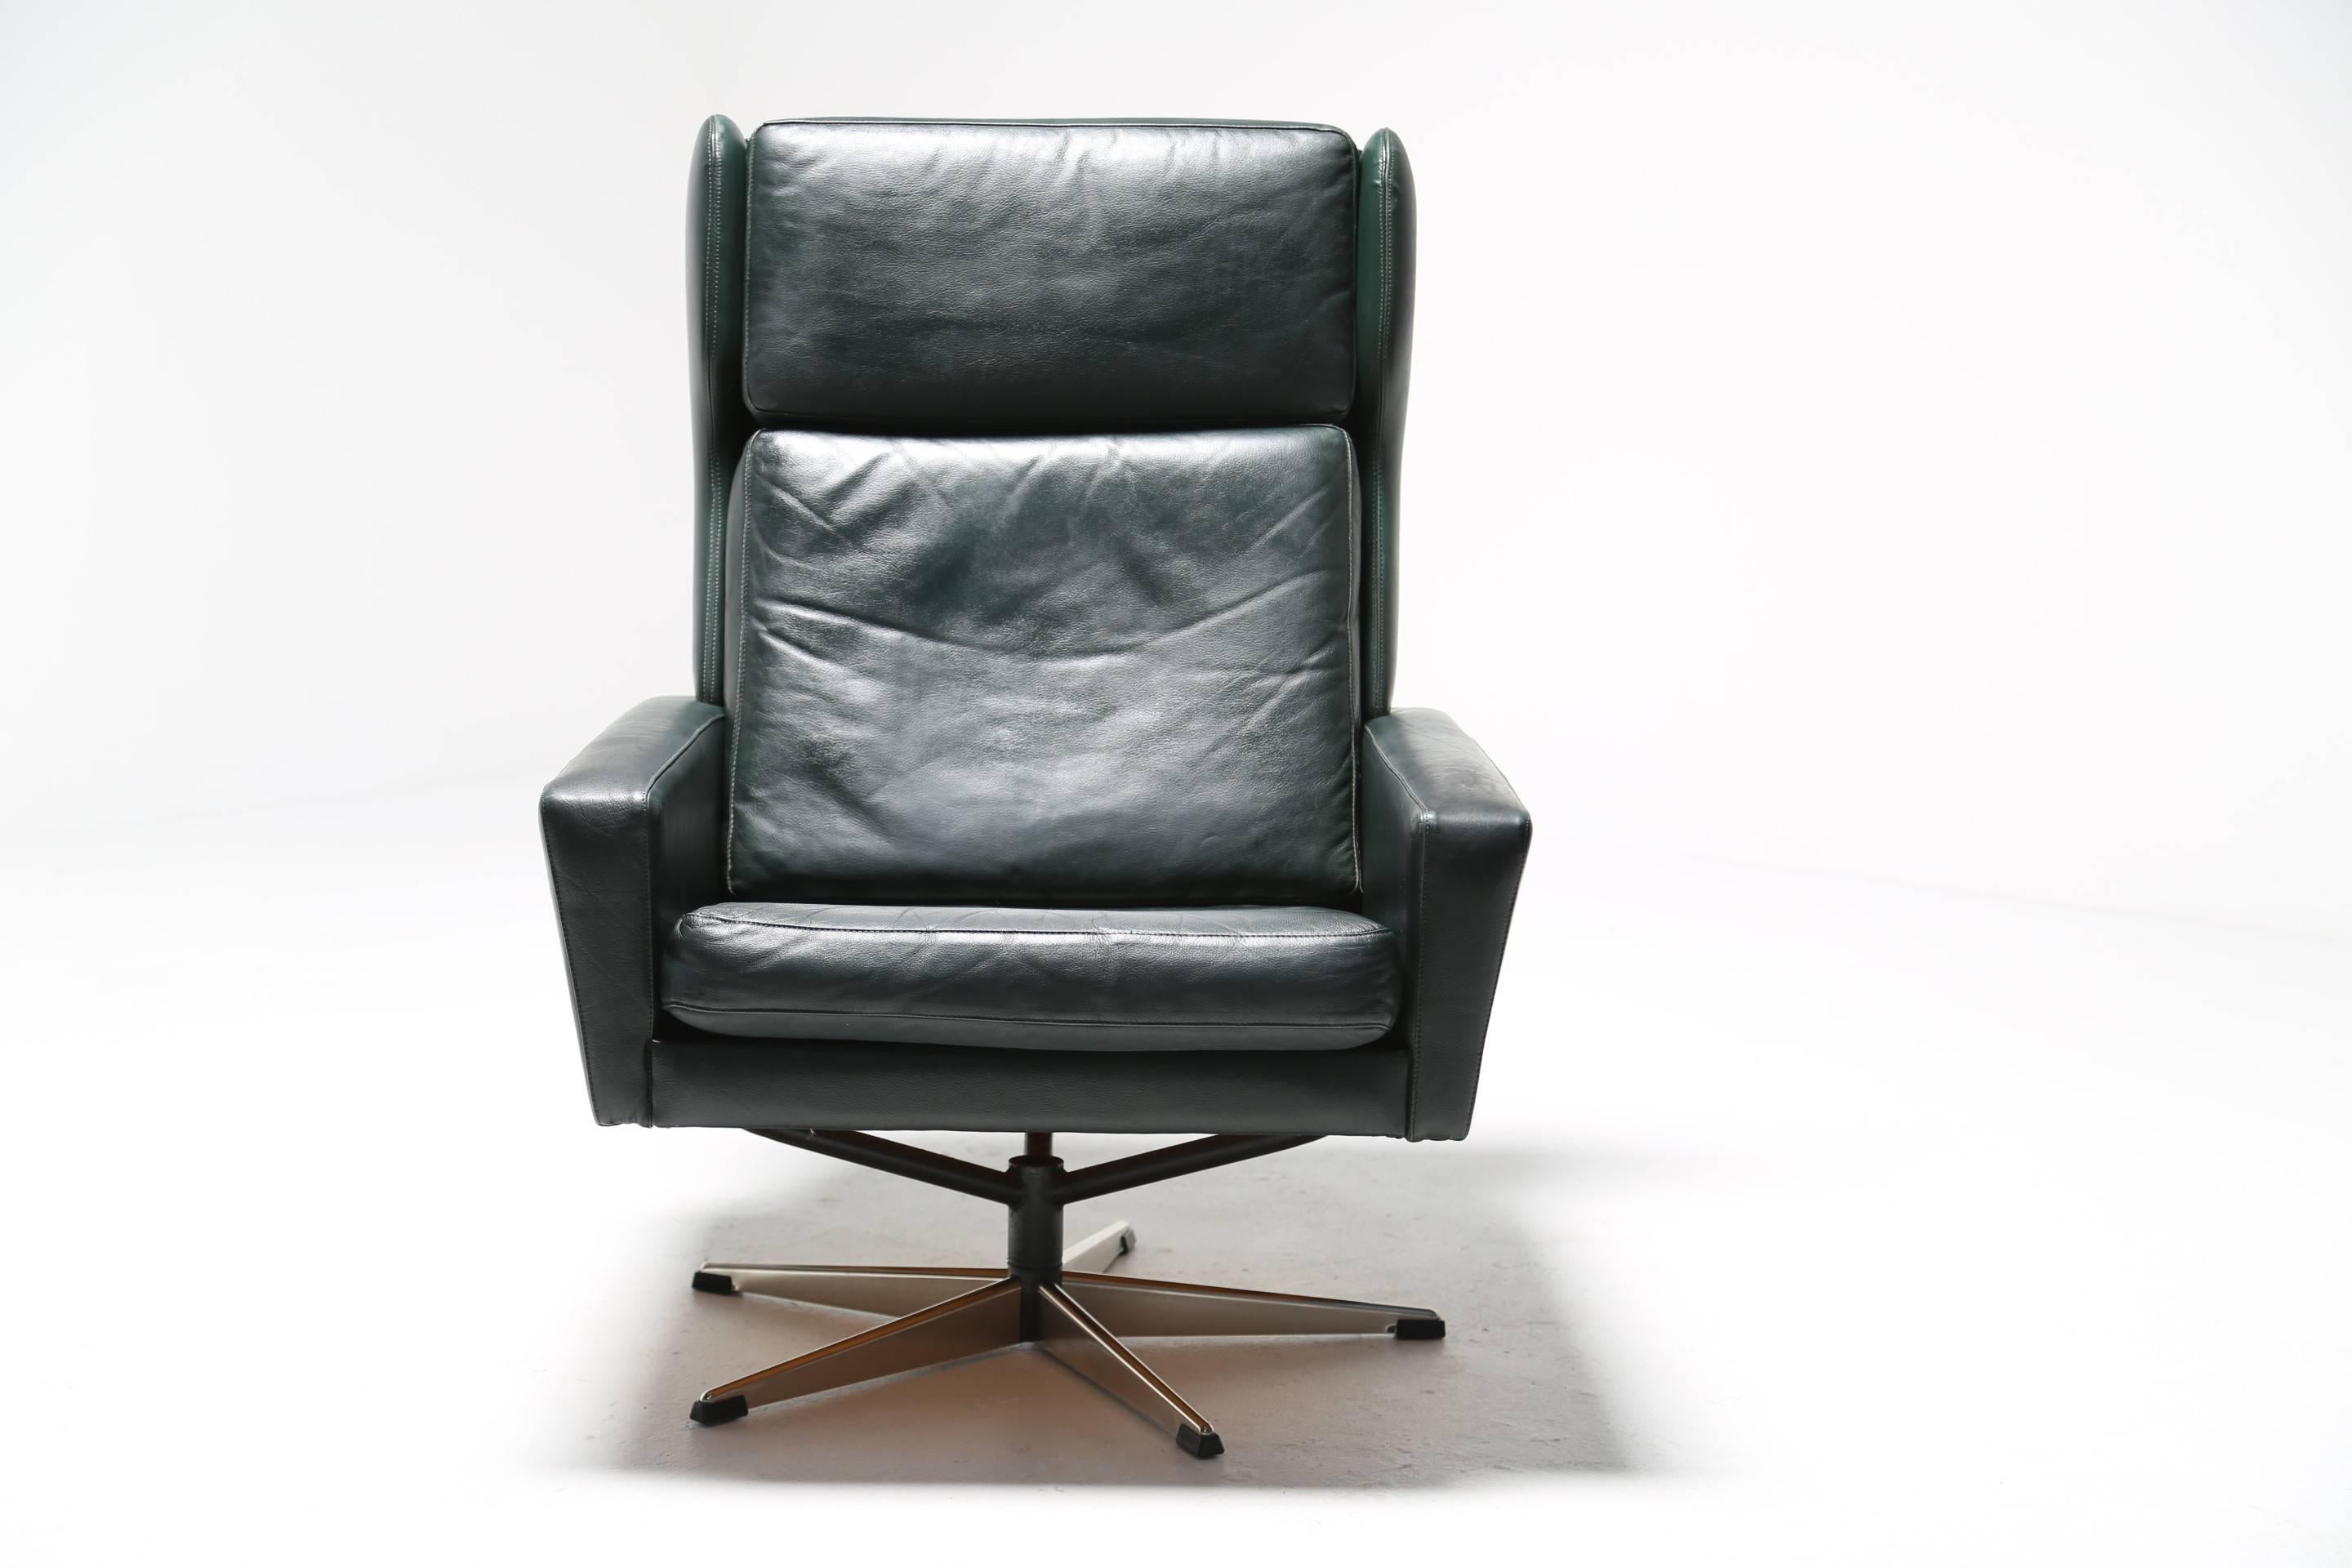 A robust and fabulously comfortable Danish Mid-Century swivel chair designed by Georg Thams for Vejen Polstermøbelfabrik in the 1960s. This chair rests on a polished chrome five star base and is upholstered in it's original deepest dark green